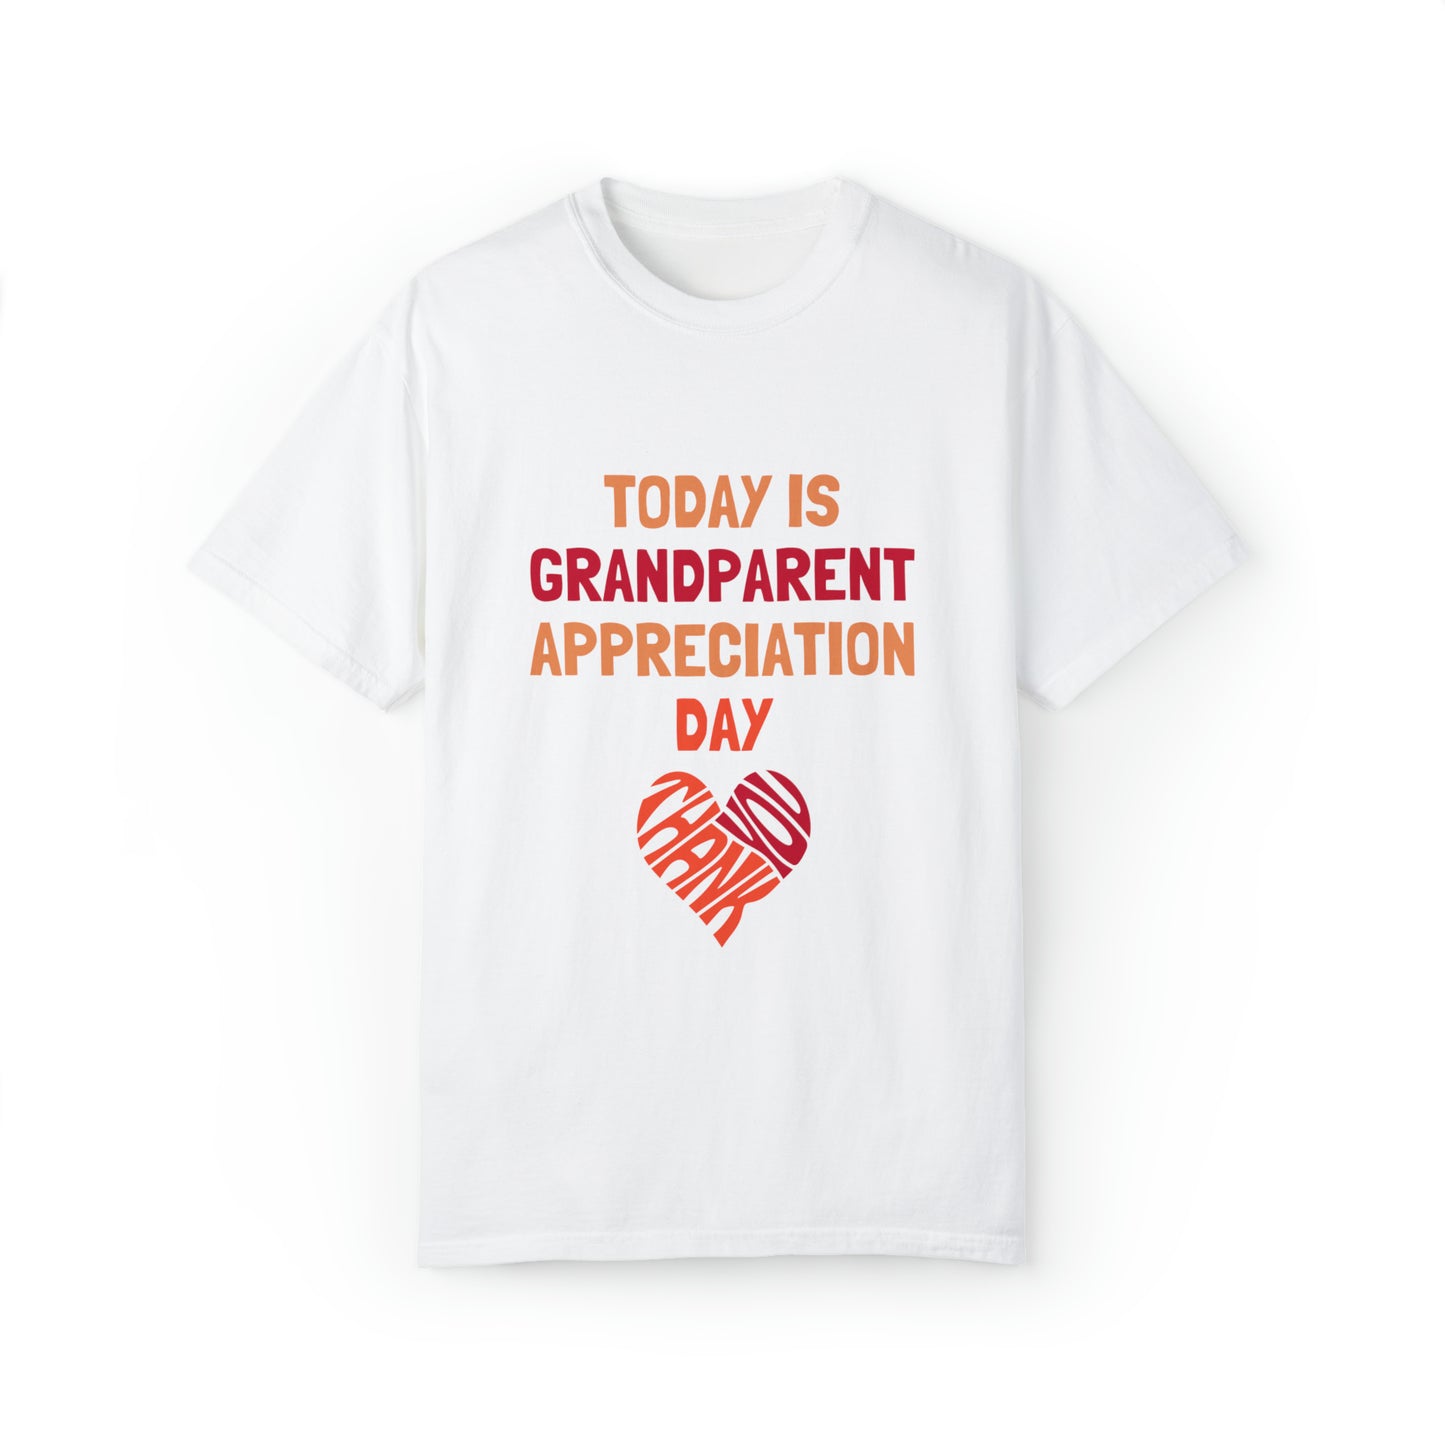 Today Is Grandparent Appreciation Day - Unisex Garment-Dyed T-shirt